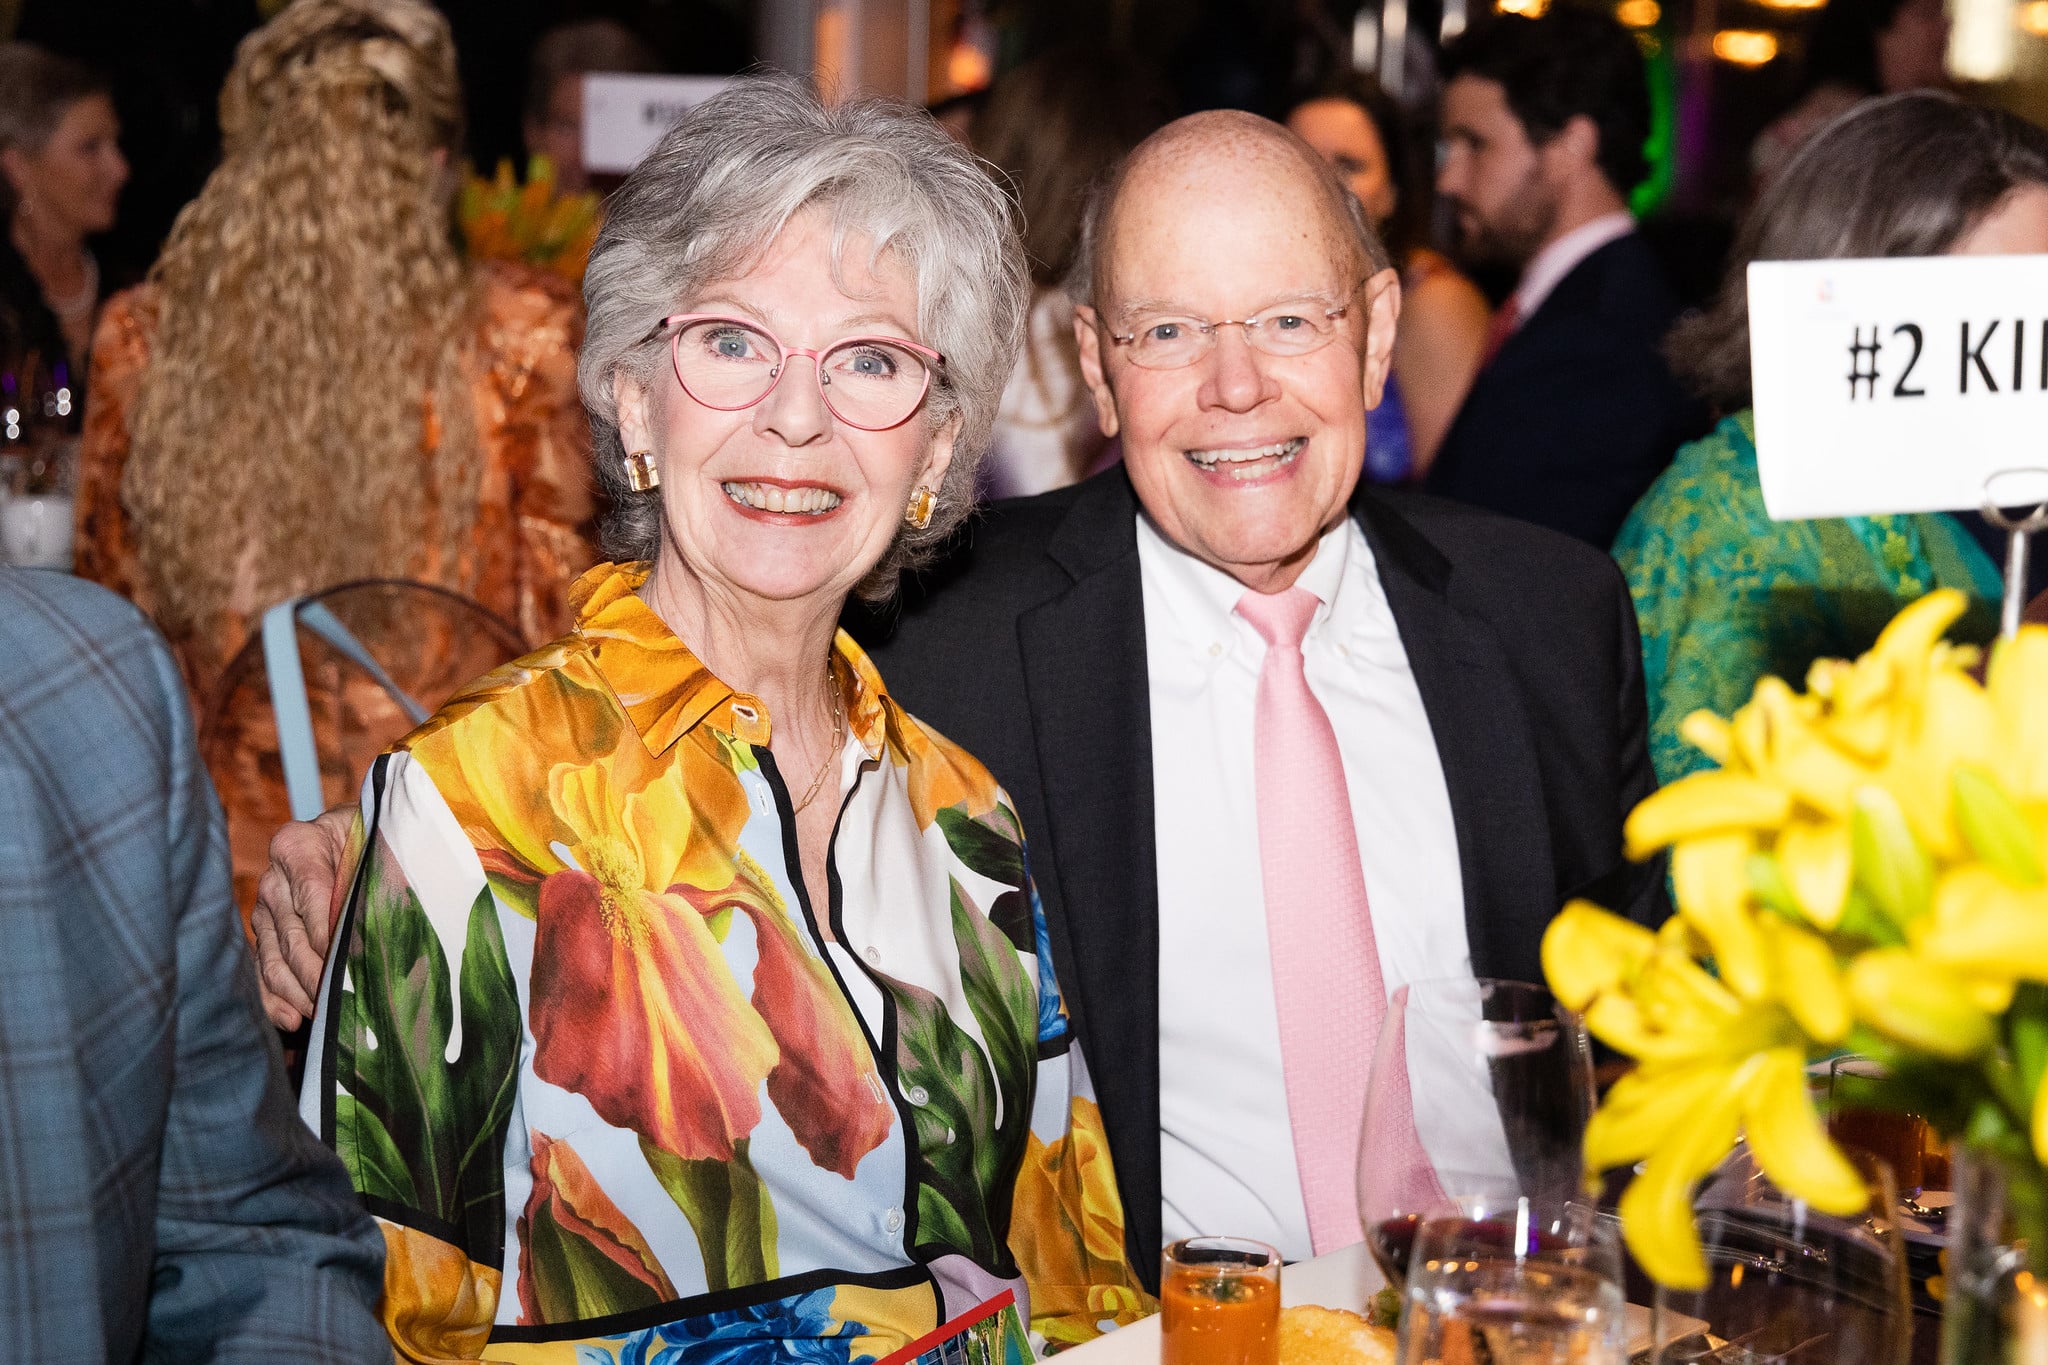 From L-R: Gayle Eury, Bob Eury Gala on the Green® at Discovery Green in downtown Houston. February 23, 2023. Photo: Lawrence Elizabeth Knox